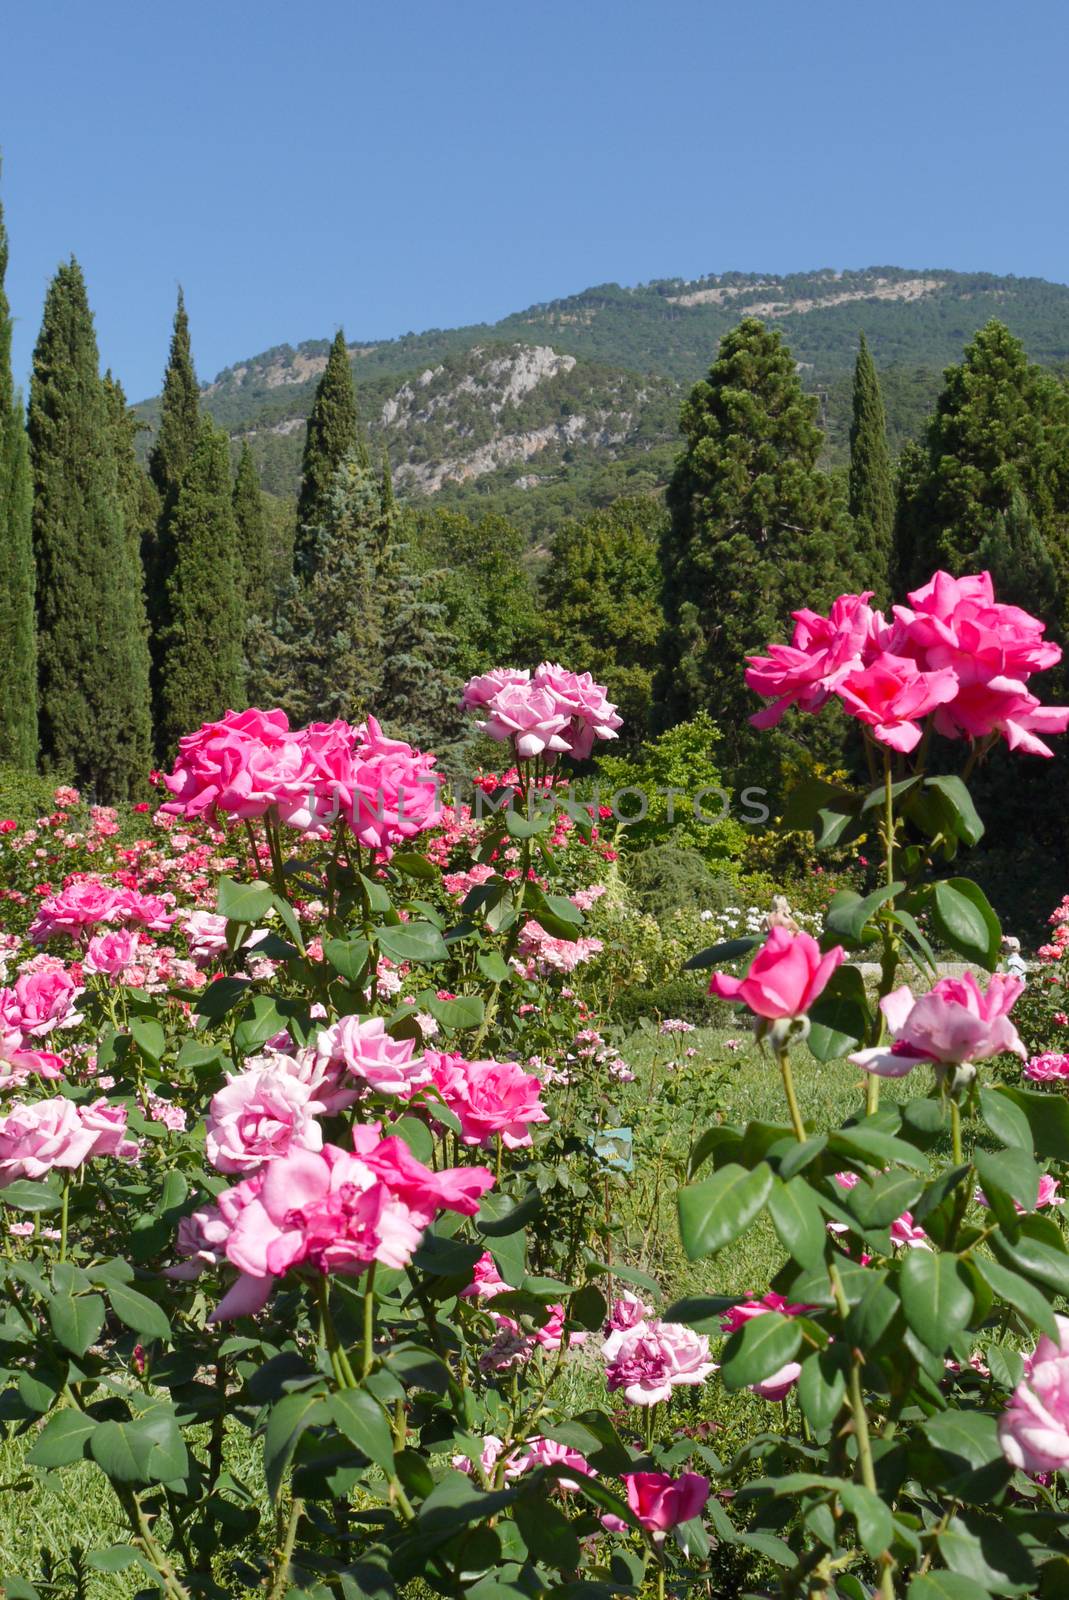 Flowerbed with large pink roses against the background of green rocky mountains by Adamchuk